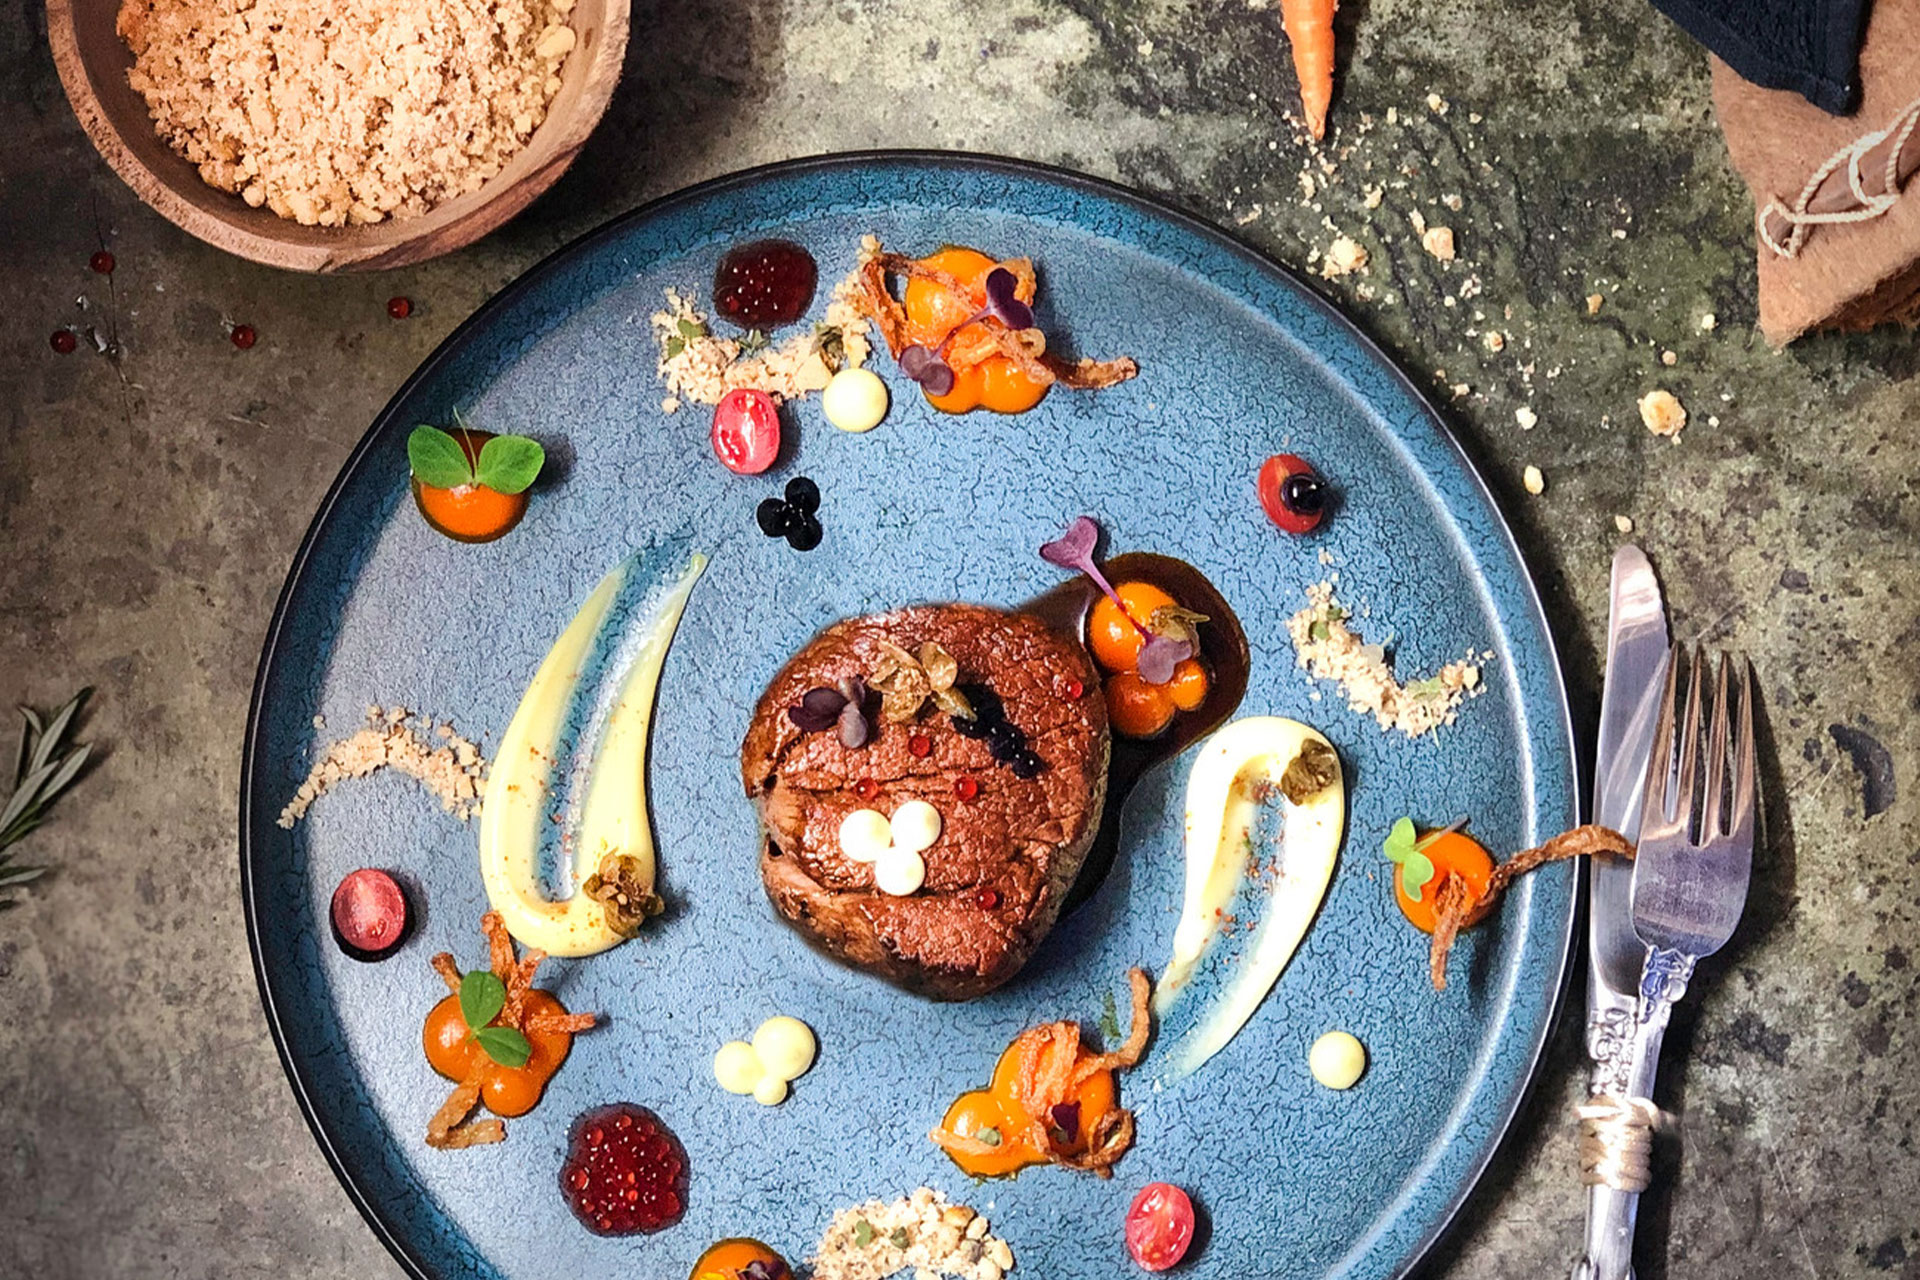 A beef fillet and accompaniments on a plate at Homespun by Matt – one of the top 10 fine dining restaurants in Cape Town.